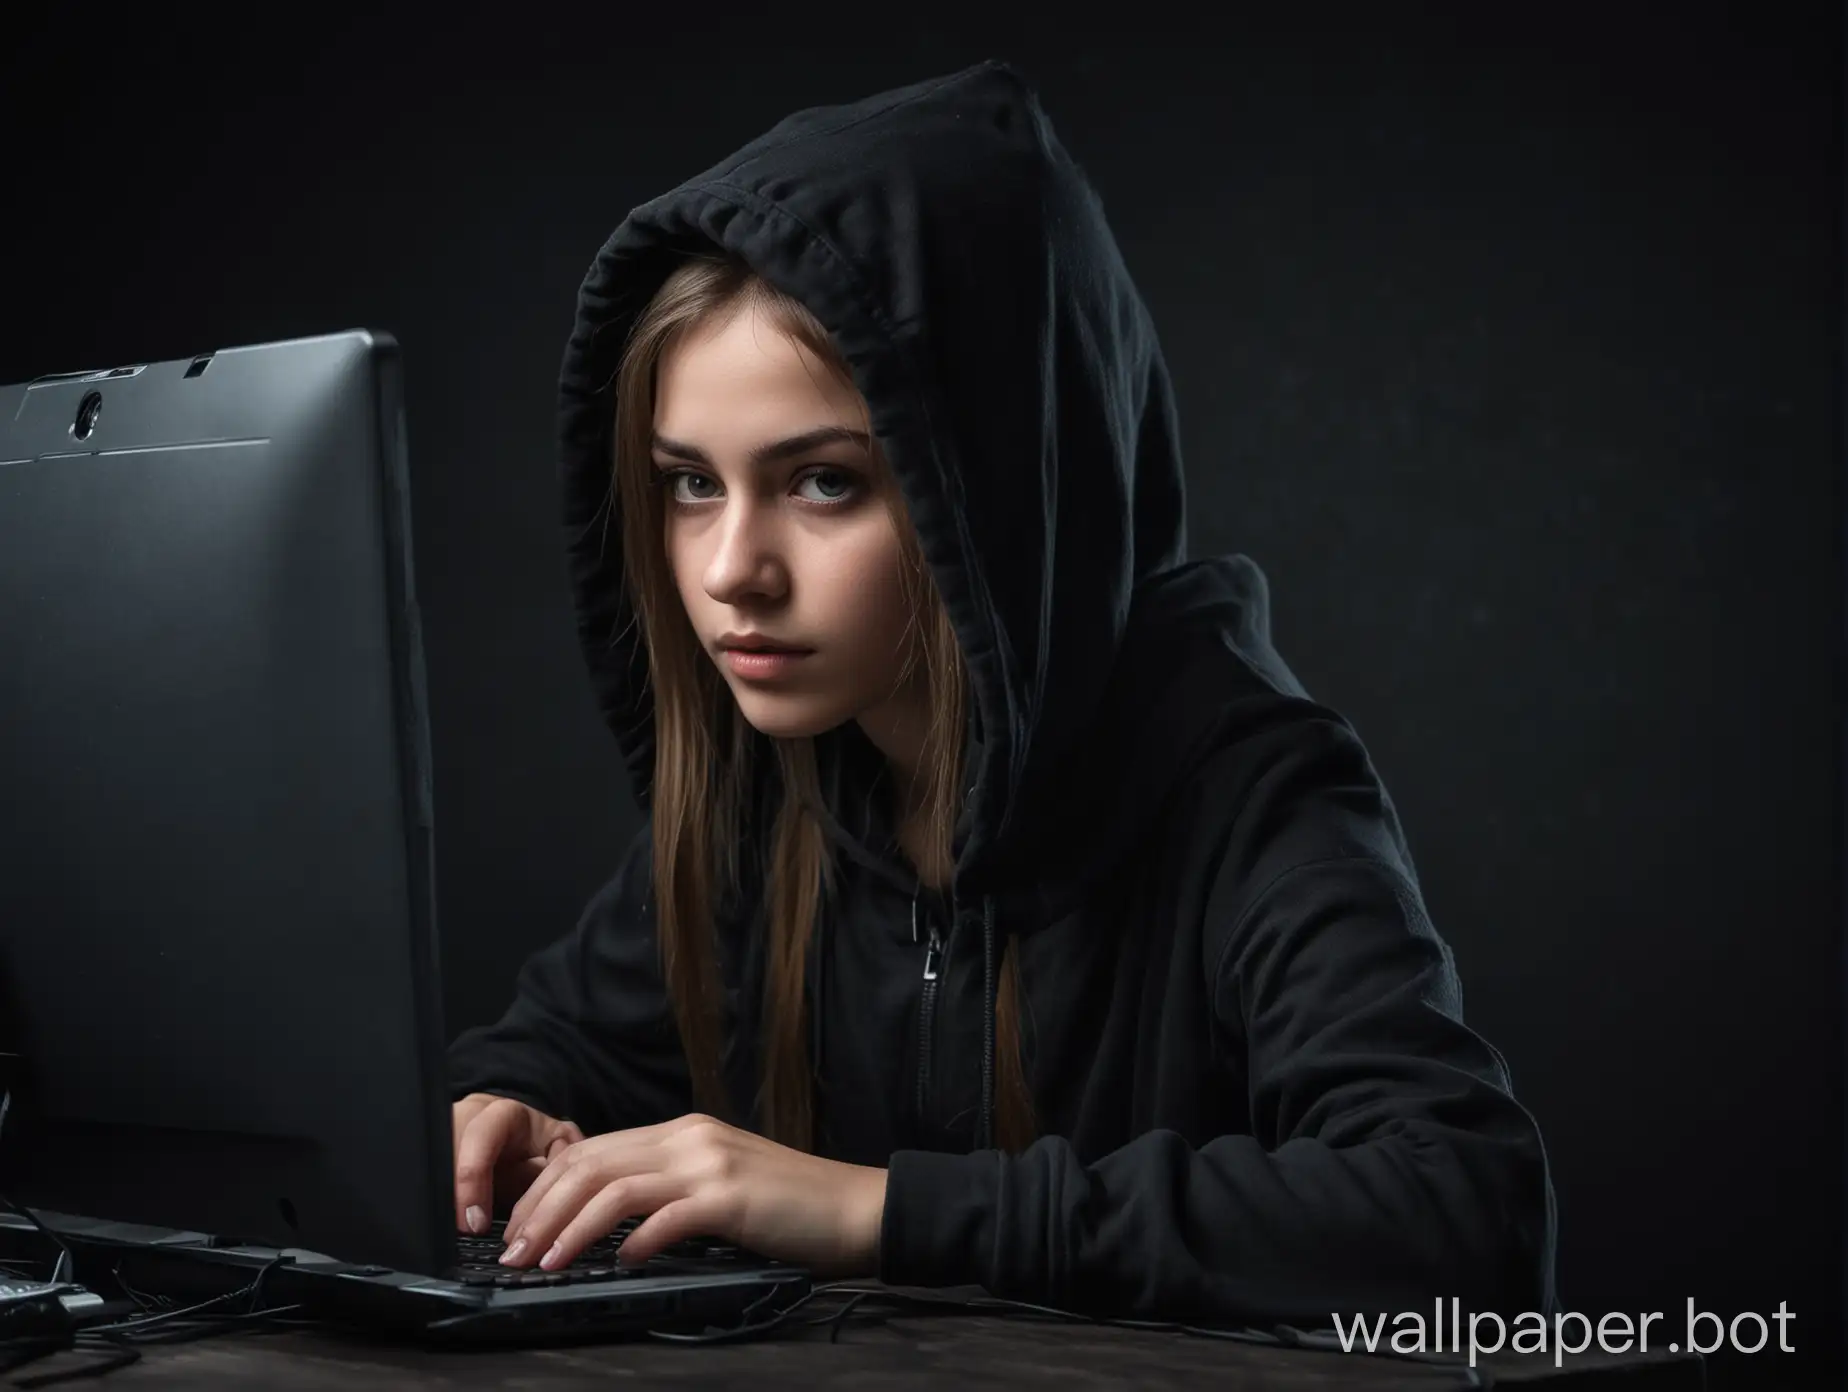 The girl hacker works at the computer on a dark background.